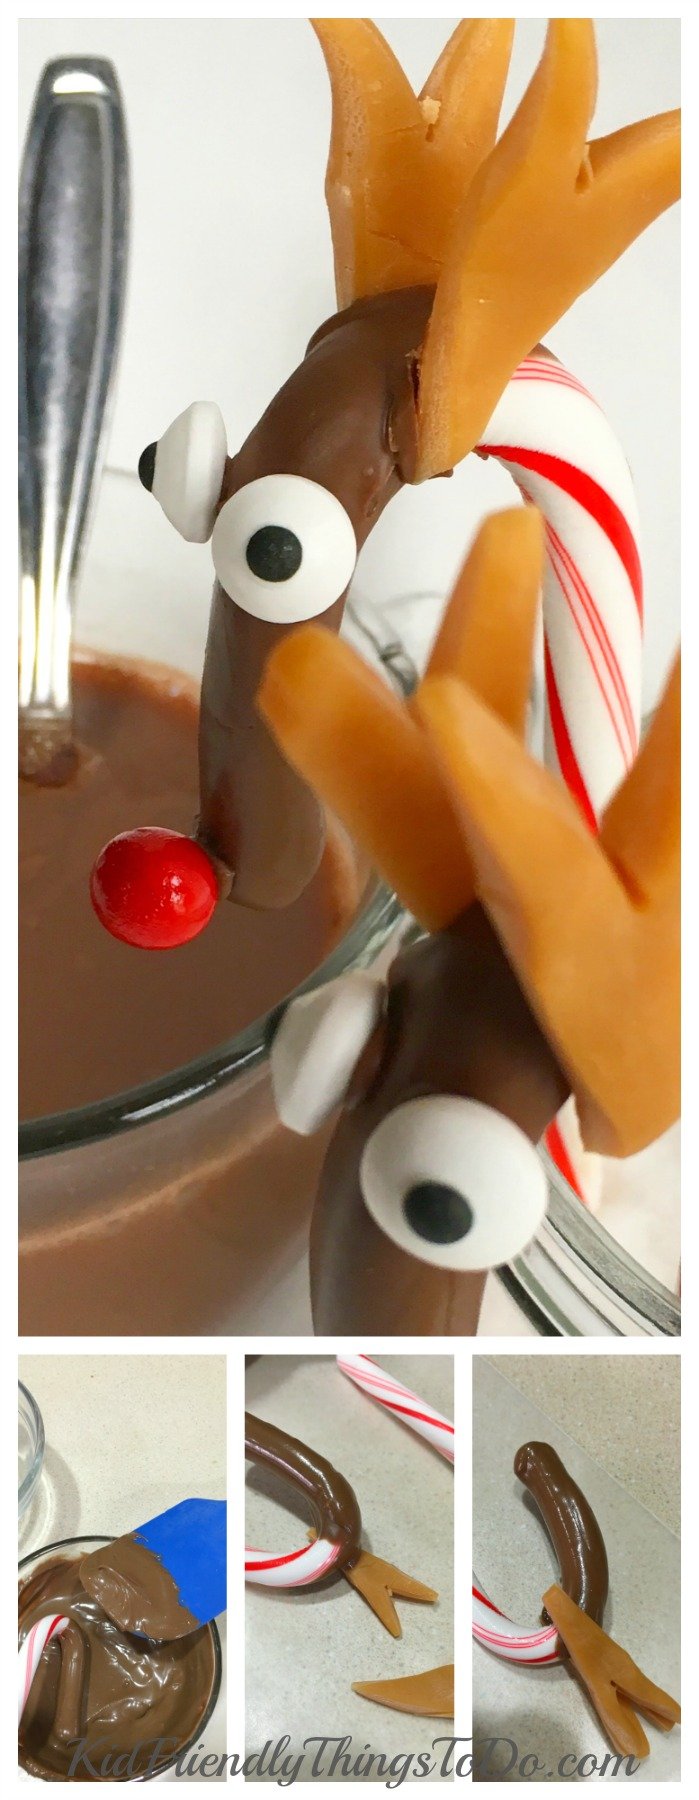 Candy Cane Reindeer Treats for Christmas fun with the kids or hot cocoa! - KidFriendlyThingsToDo.com